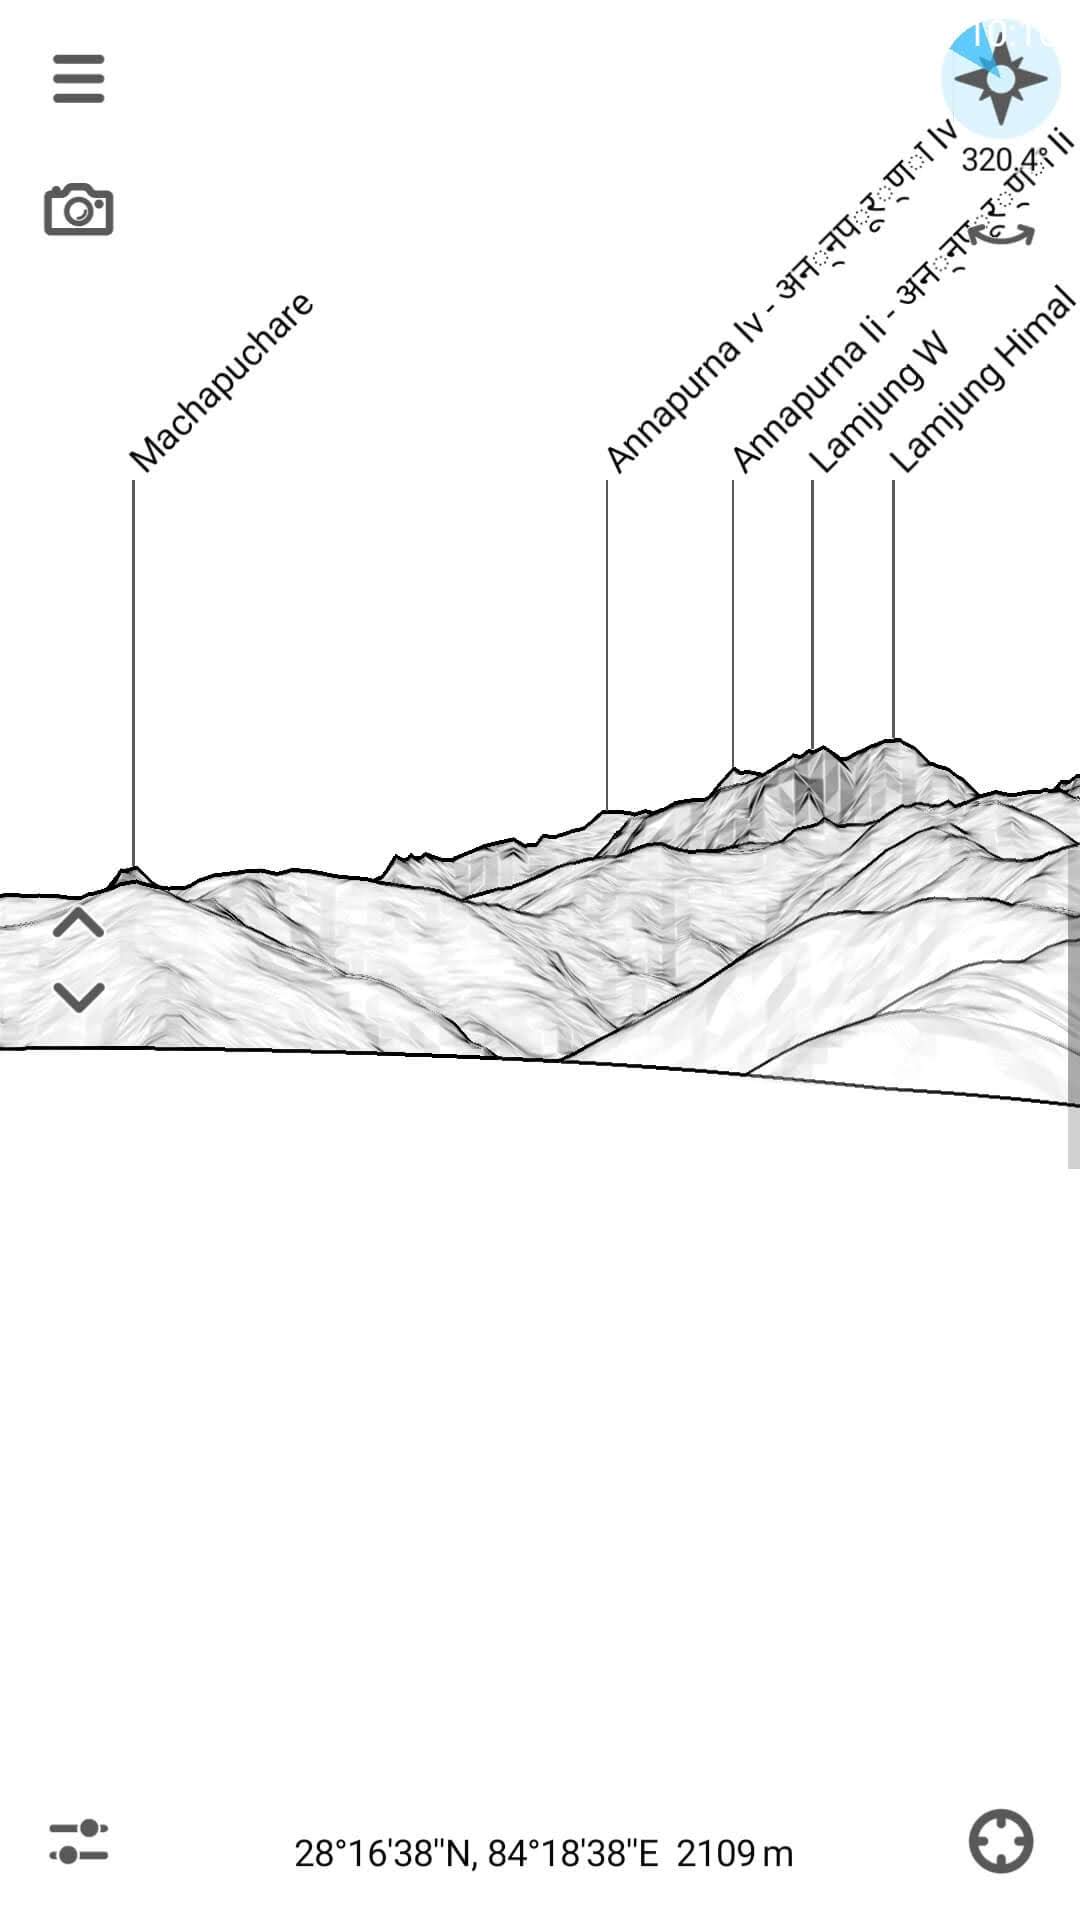 Names of the mountains with Peakfinder